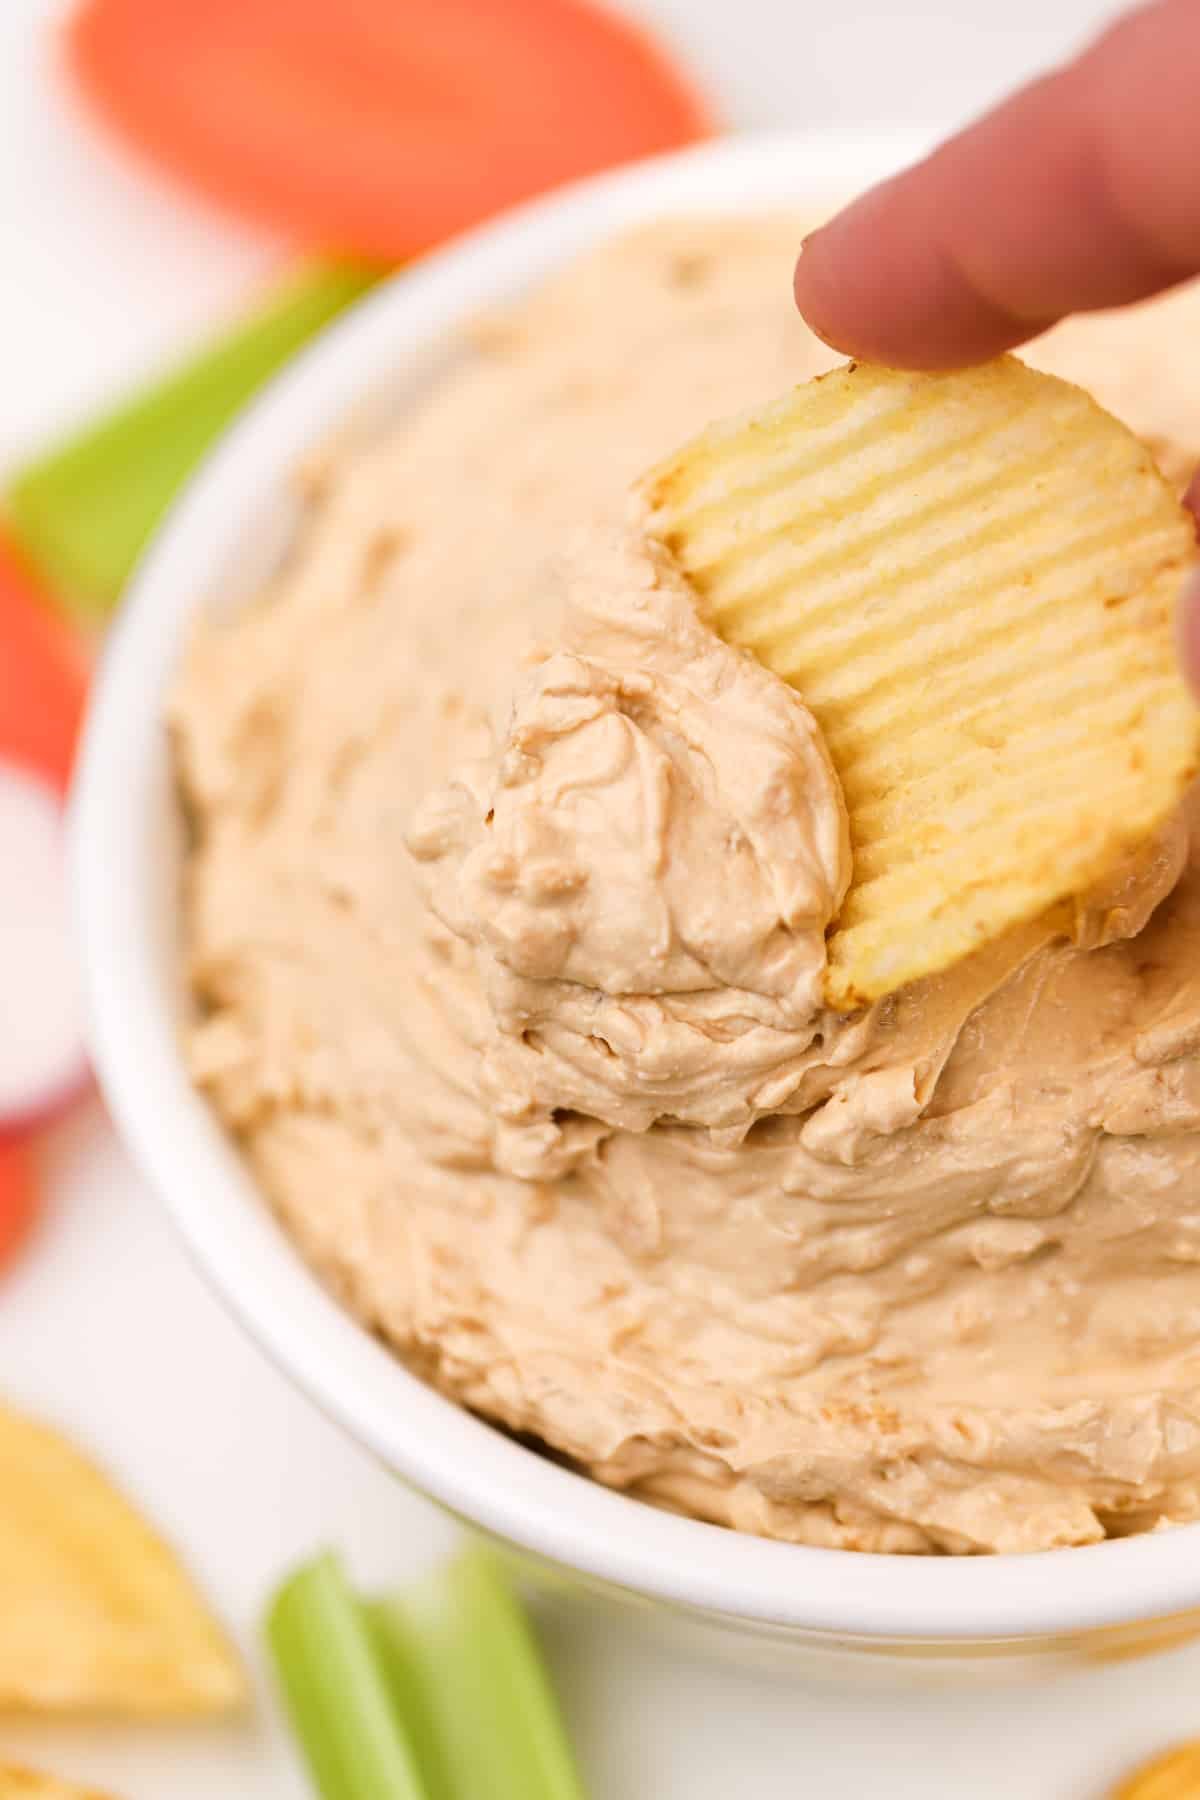 Dipping a potato chip into french onion dip.